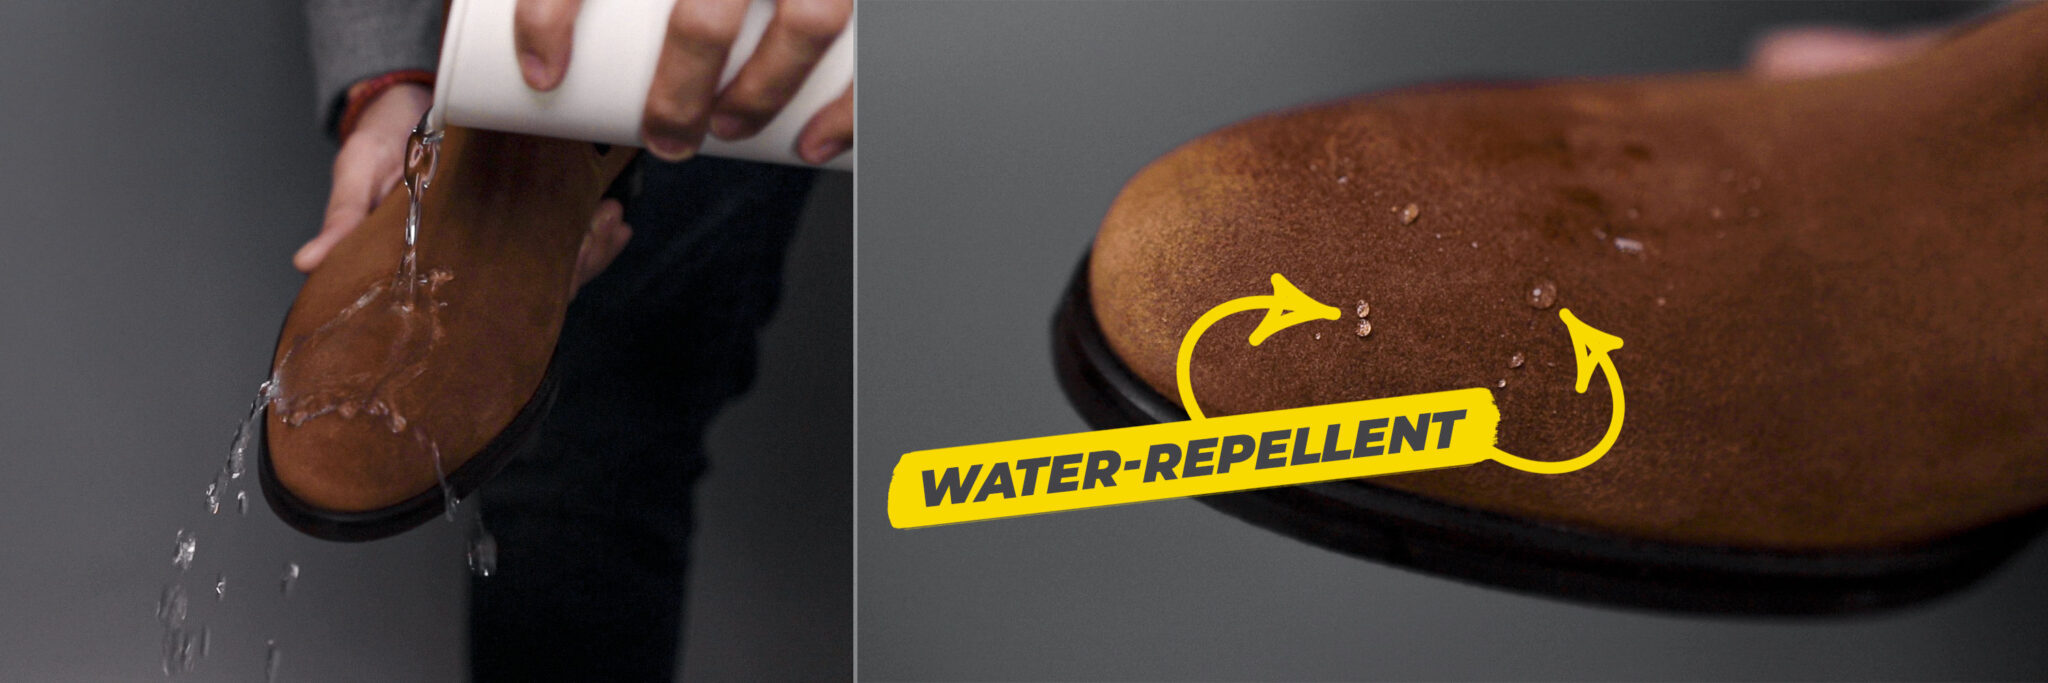 How to Waterproof Leather Shoes: 5 Ways To Protect Leather and Suede In Winter